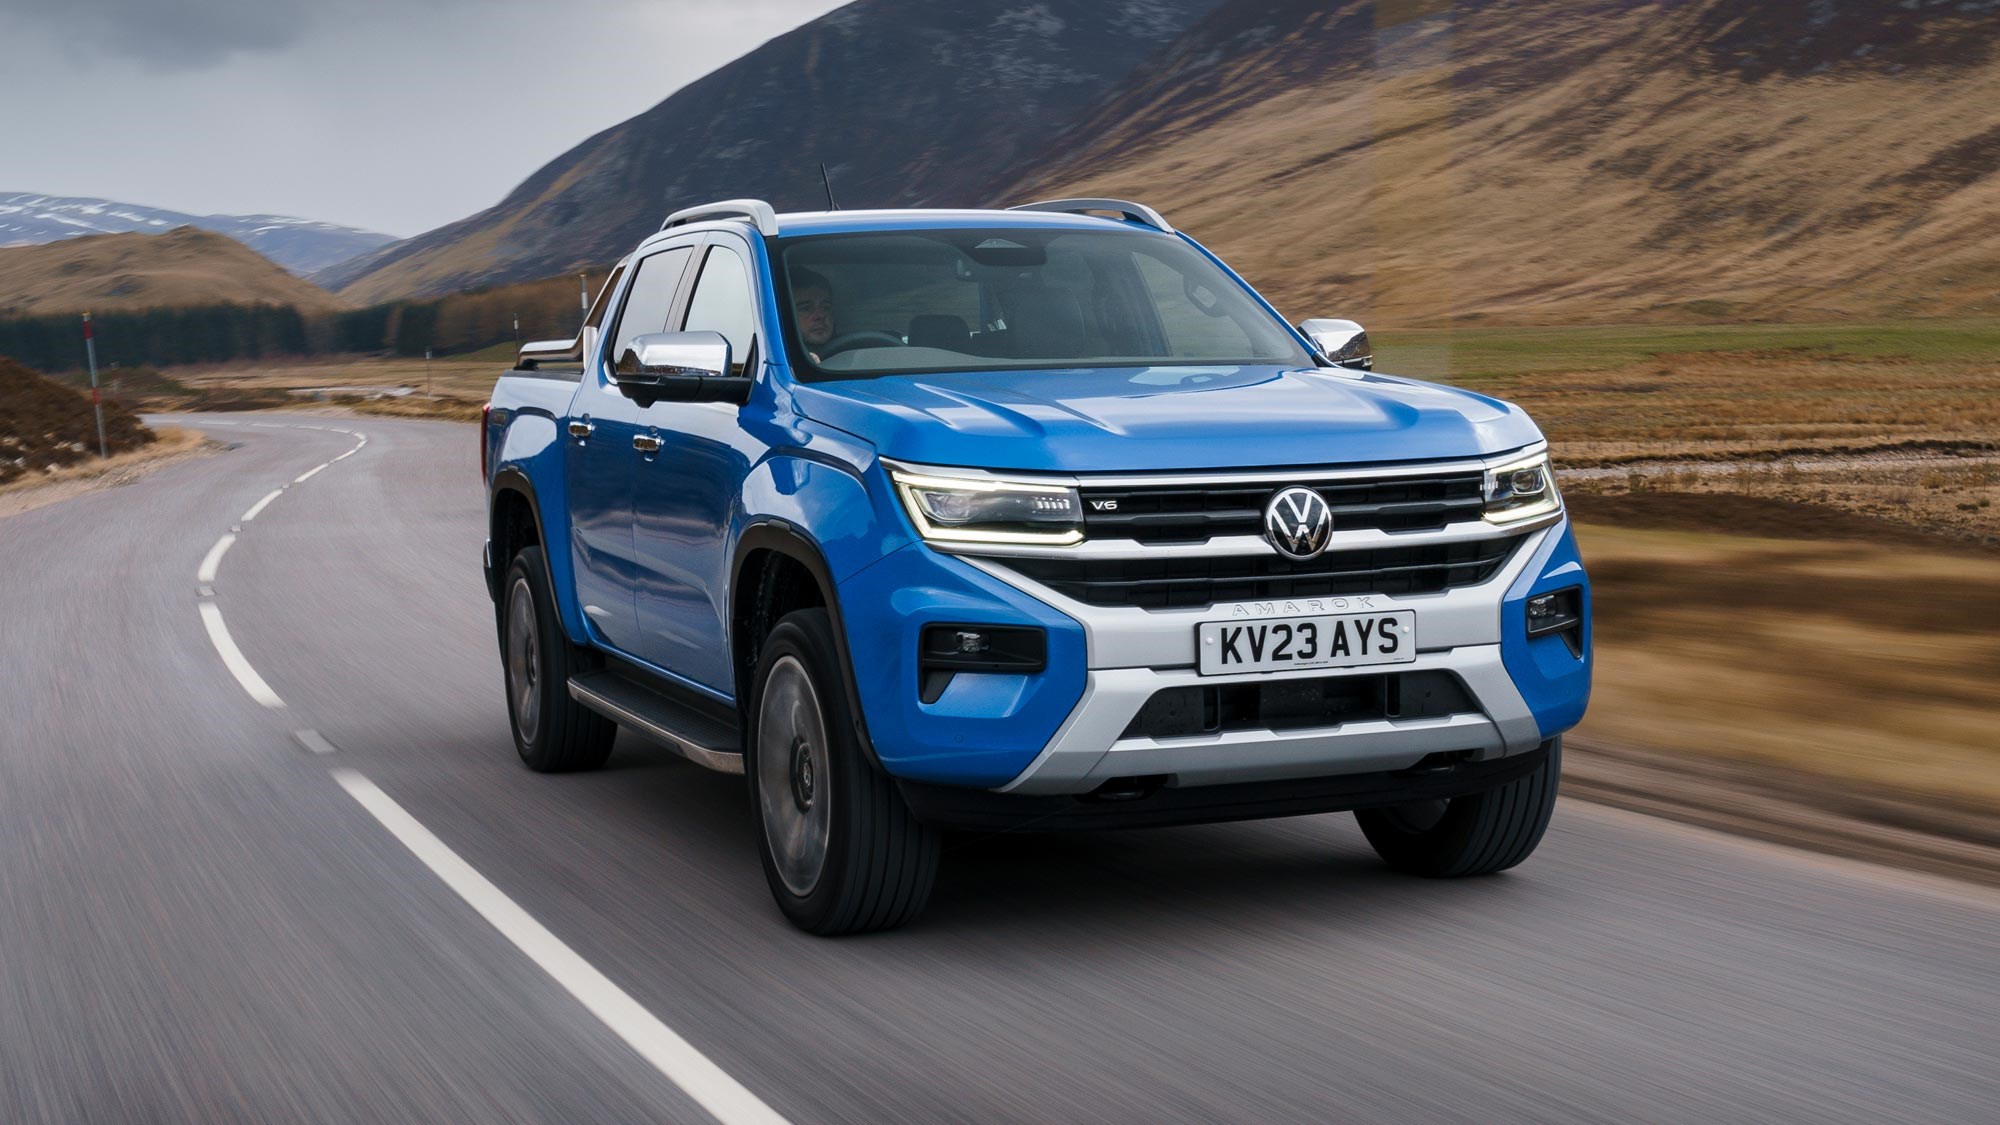 2023 VW Amarok Price Review, Cost Of Ownership, Features, Practicality, Models